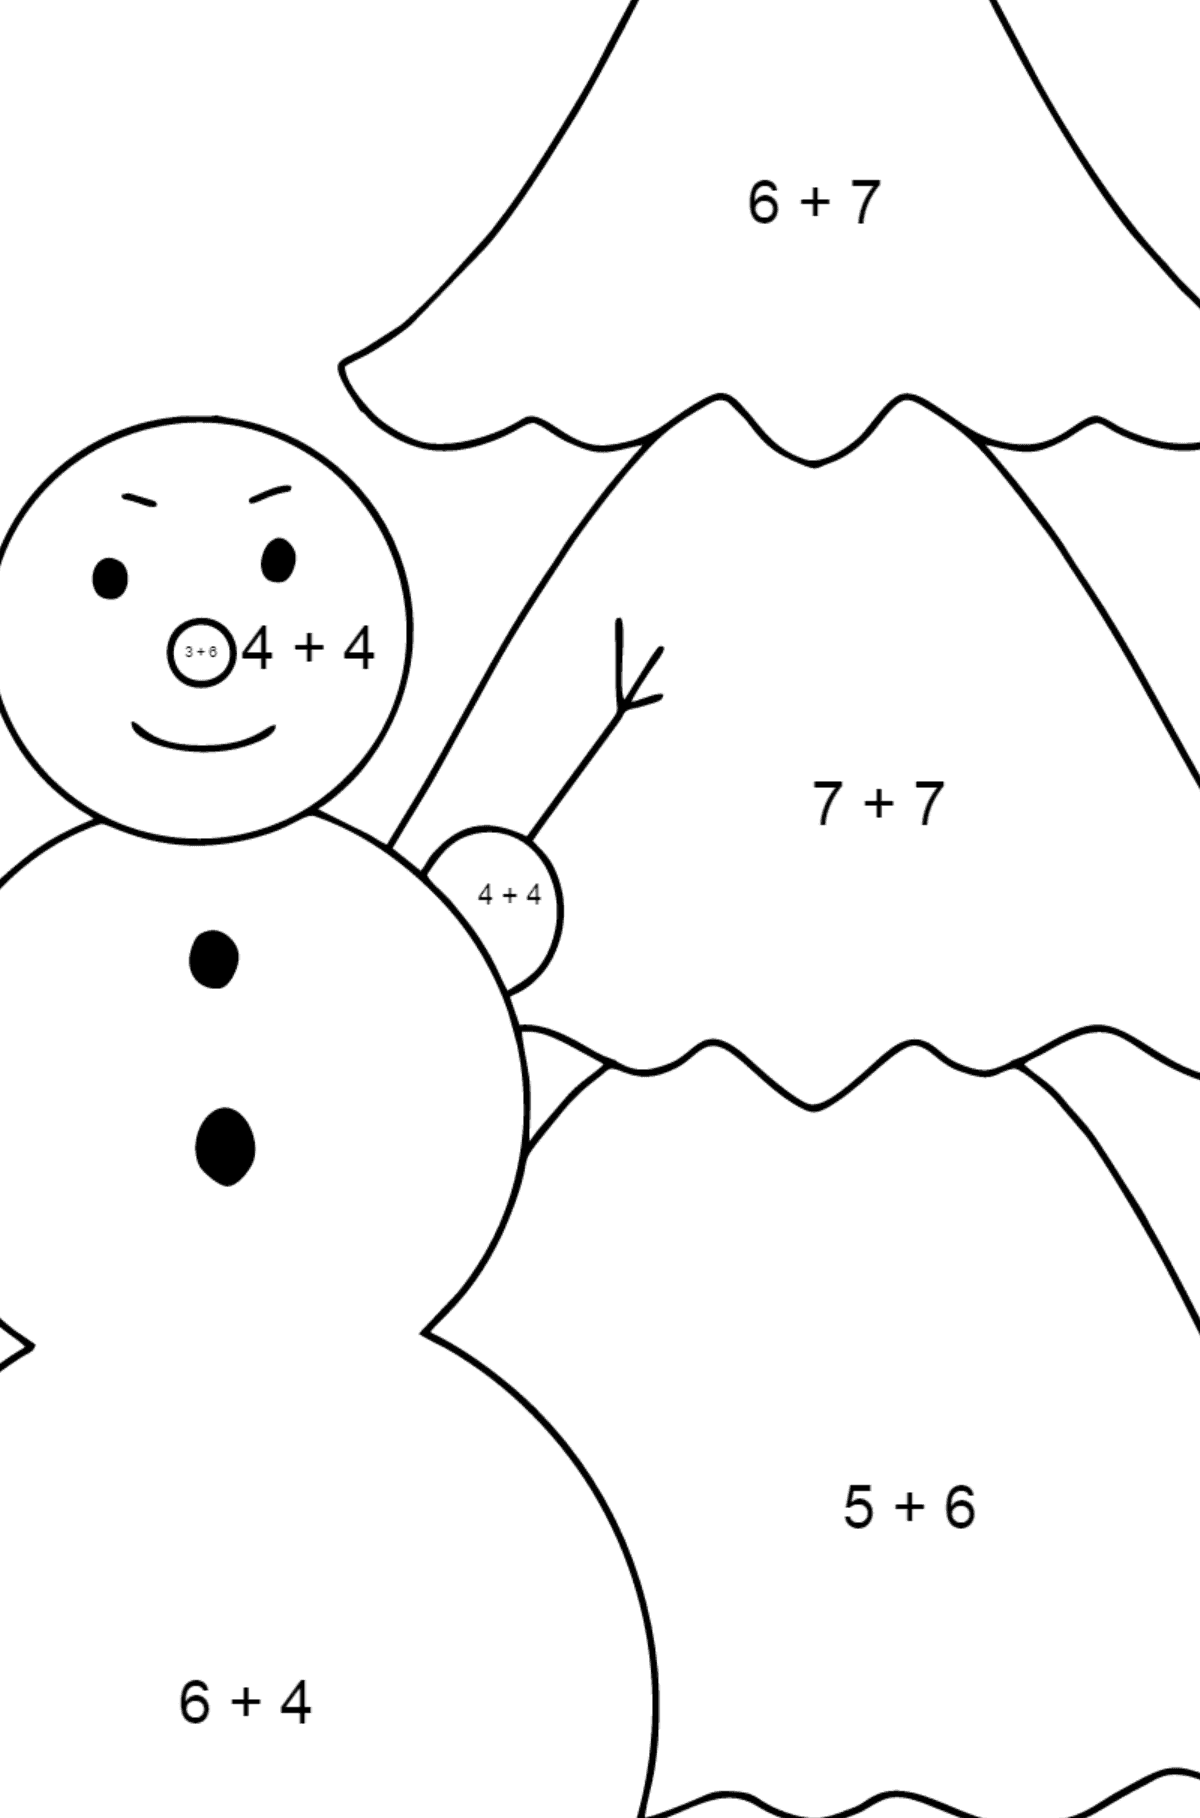 Snowman coloring page for kids - Math Coloring - Addition for Kids